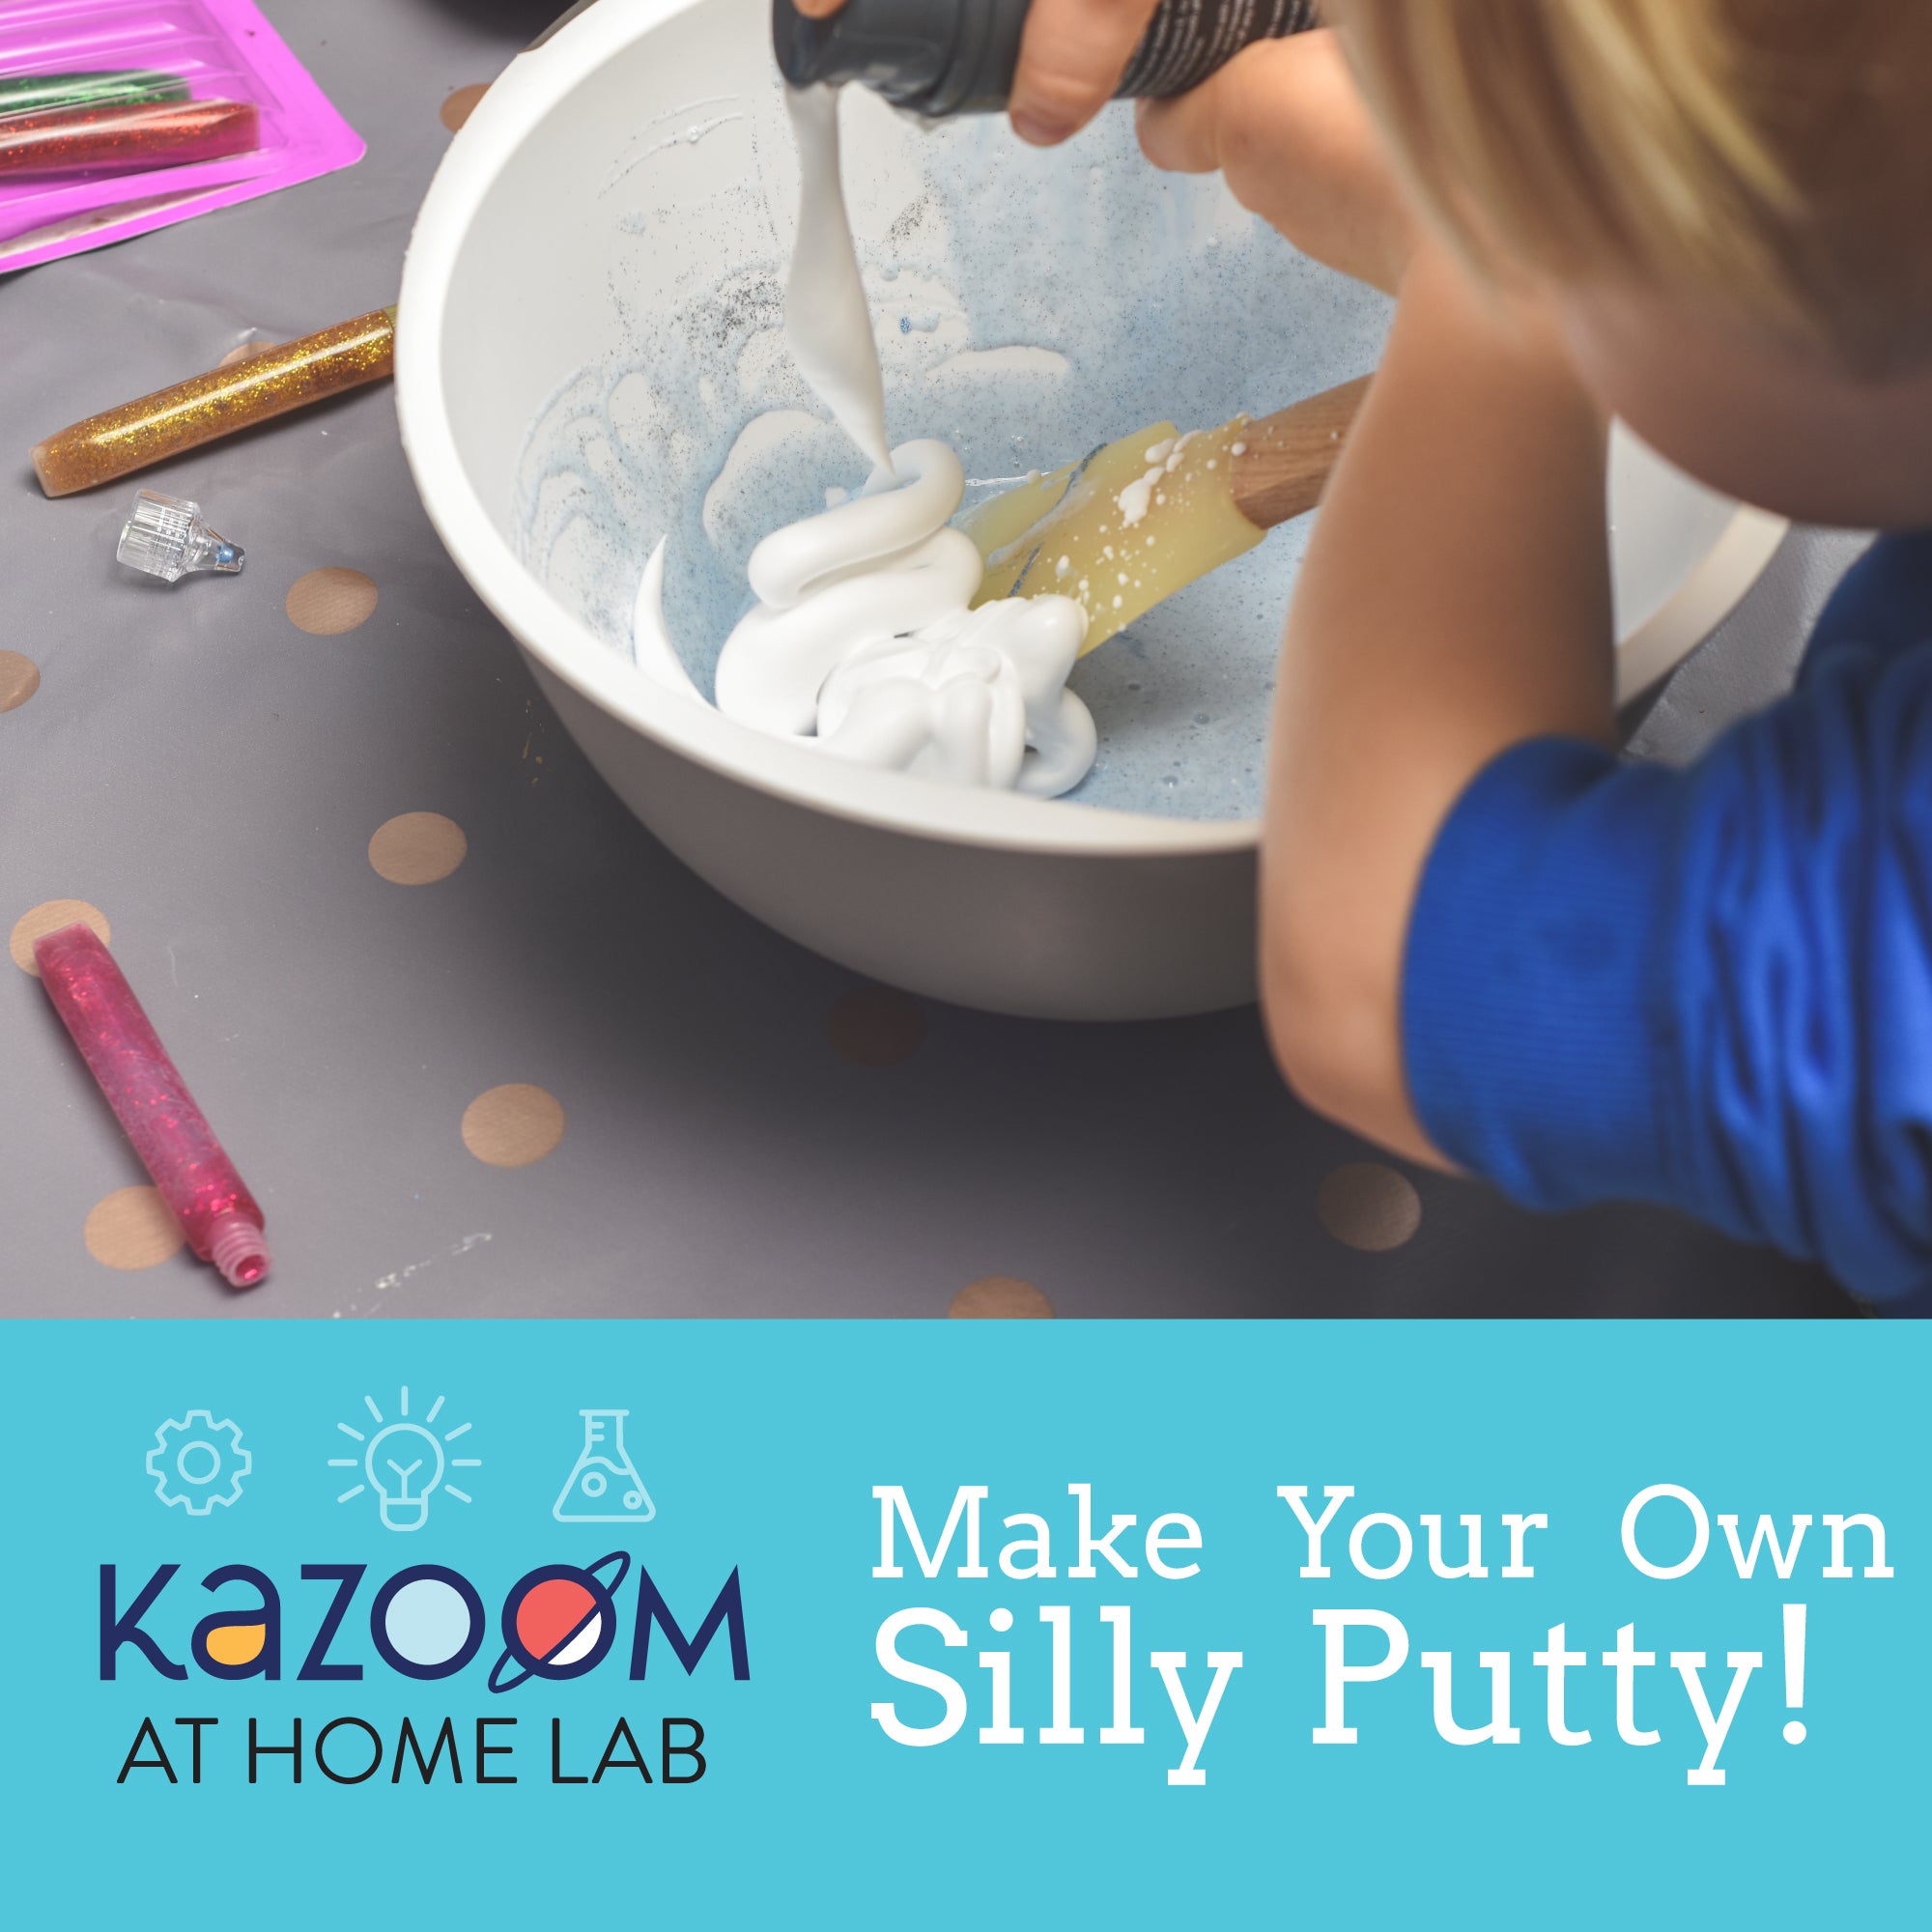 Make Your Own Silly Putty